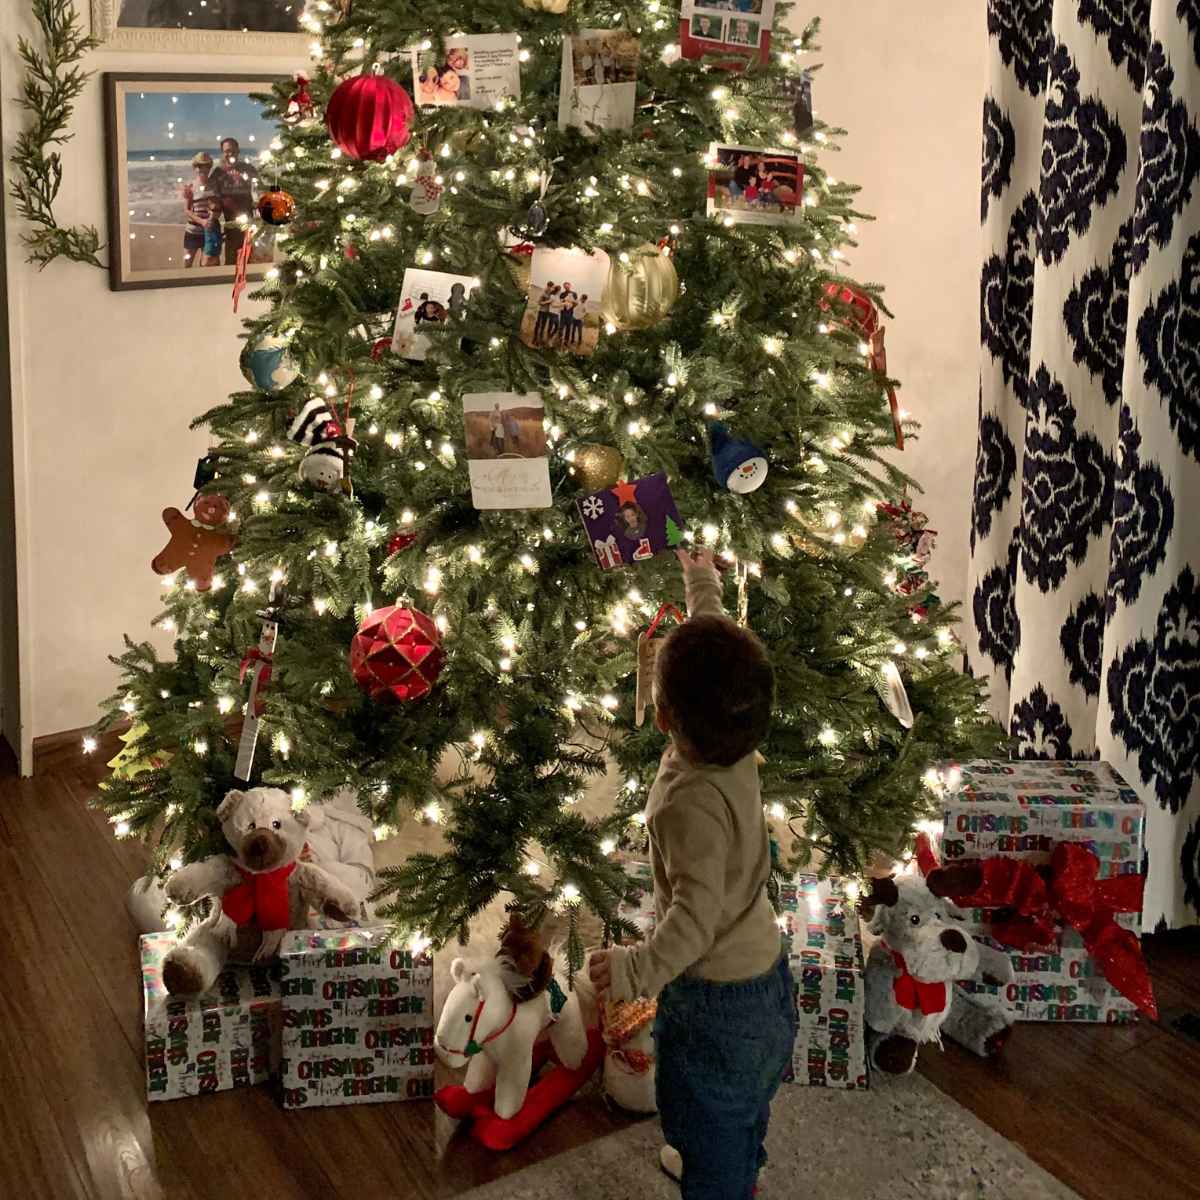 toddler looking up at the Christmas tree